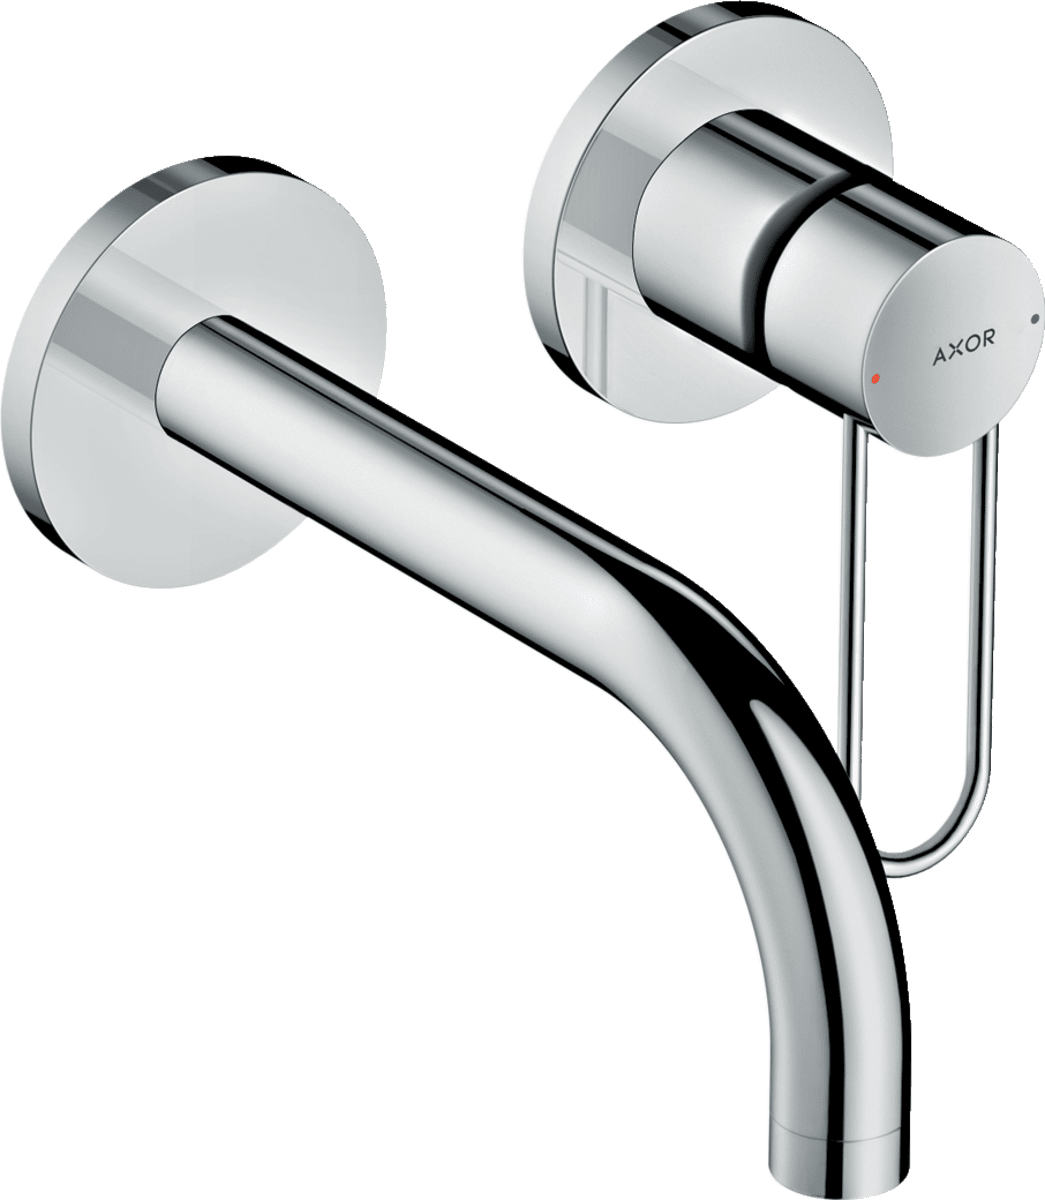 Picture of HANSGROHE AXOR Uno Single lever basin mixer for concealed installation wall-mounted with loop handle and spout 165 mm #38121000 - Chrome